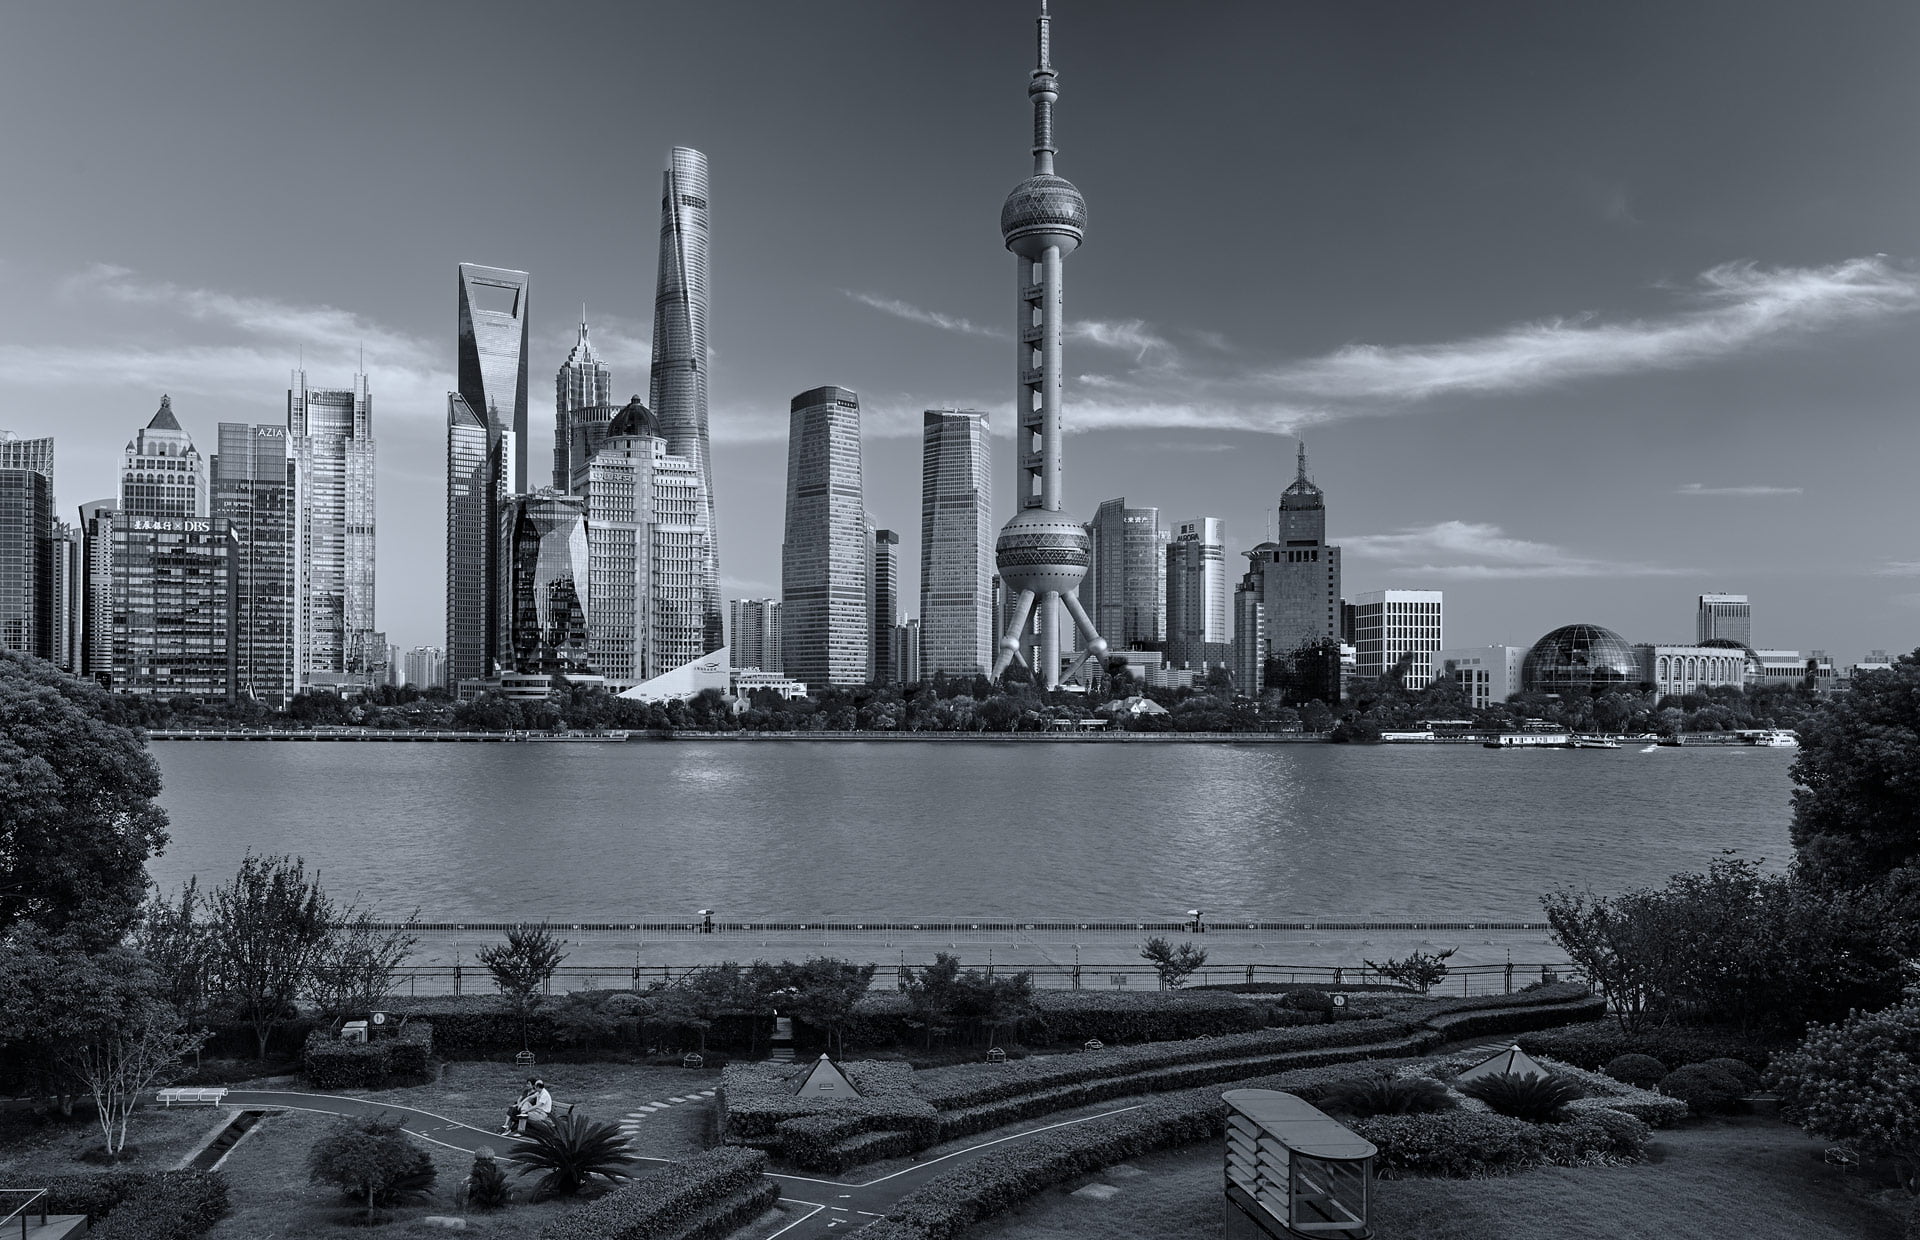 Black and white photo of the Shanghai skyline. Shanghai photo studio specialized in architecture photography.